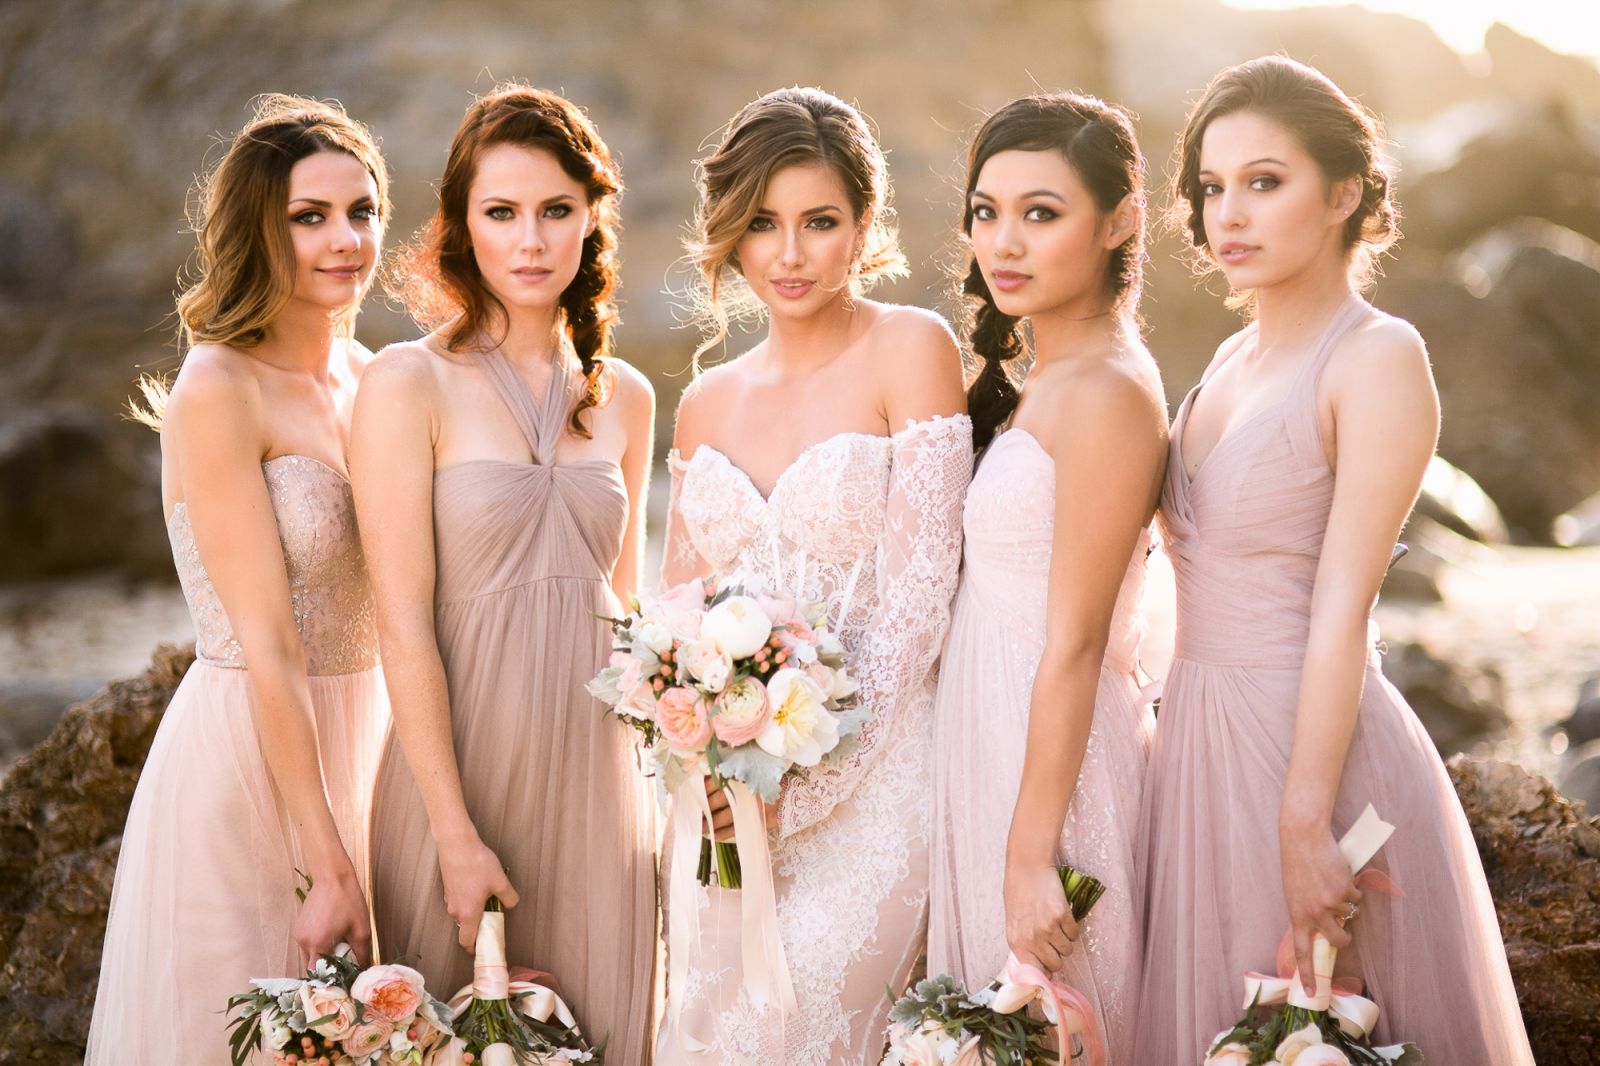 how to photograph bridesmaids wedding photography guide